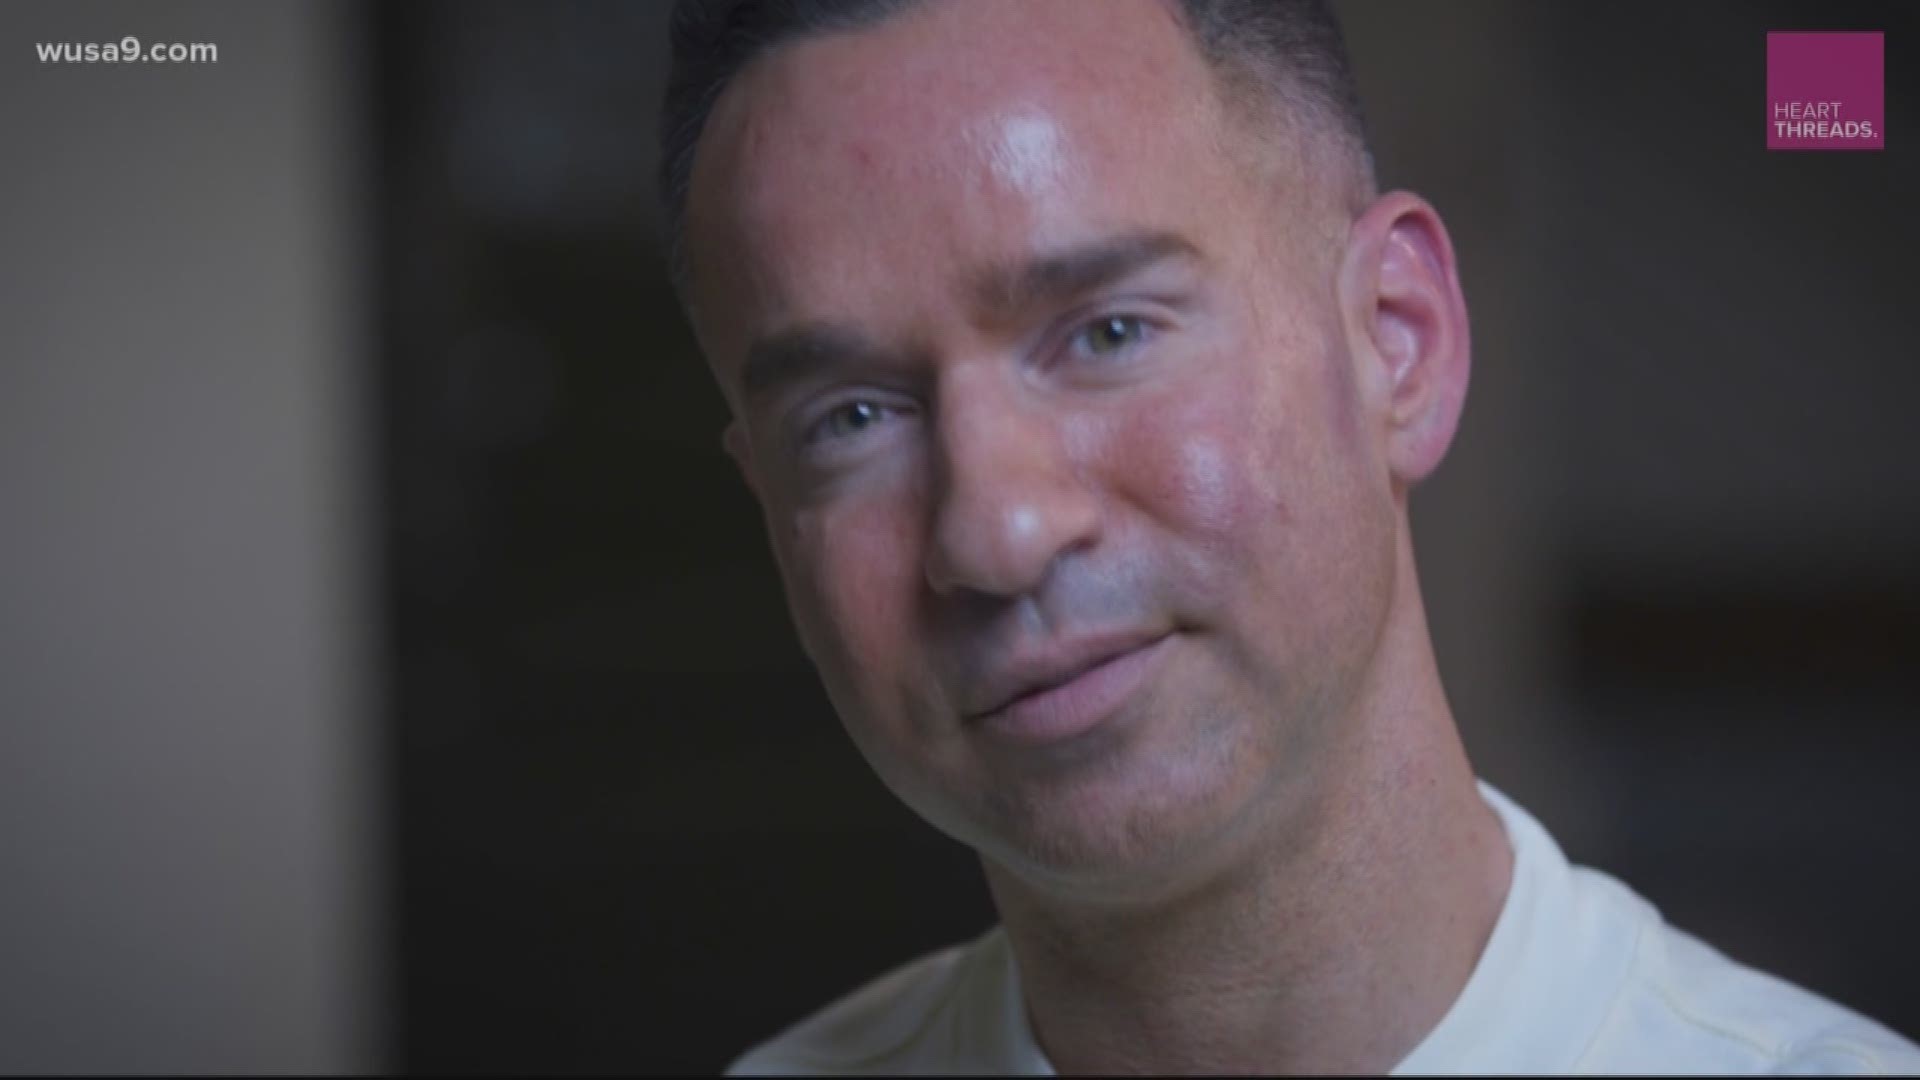 On the reality show Jersey Shore, Mike "The Situation" Sorrentino was a suave, muscled playboy, but behind the scenes, addiction was destroying his life.